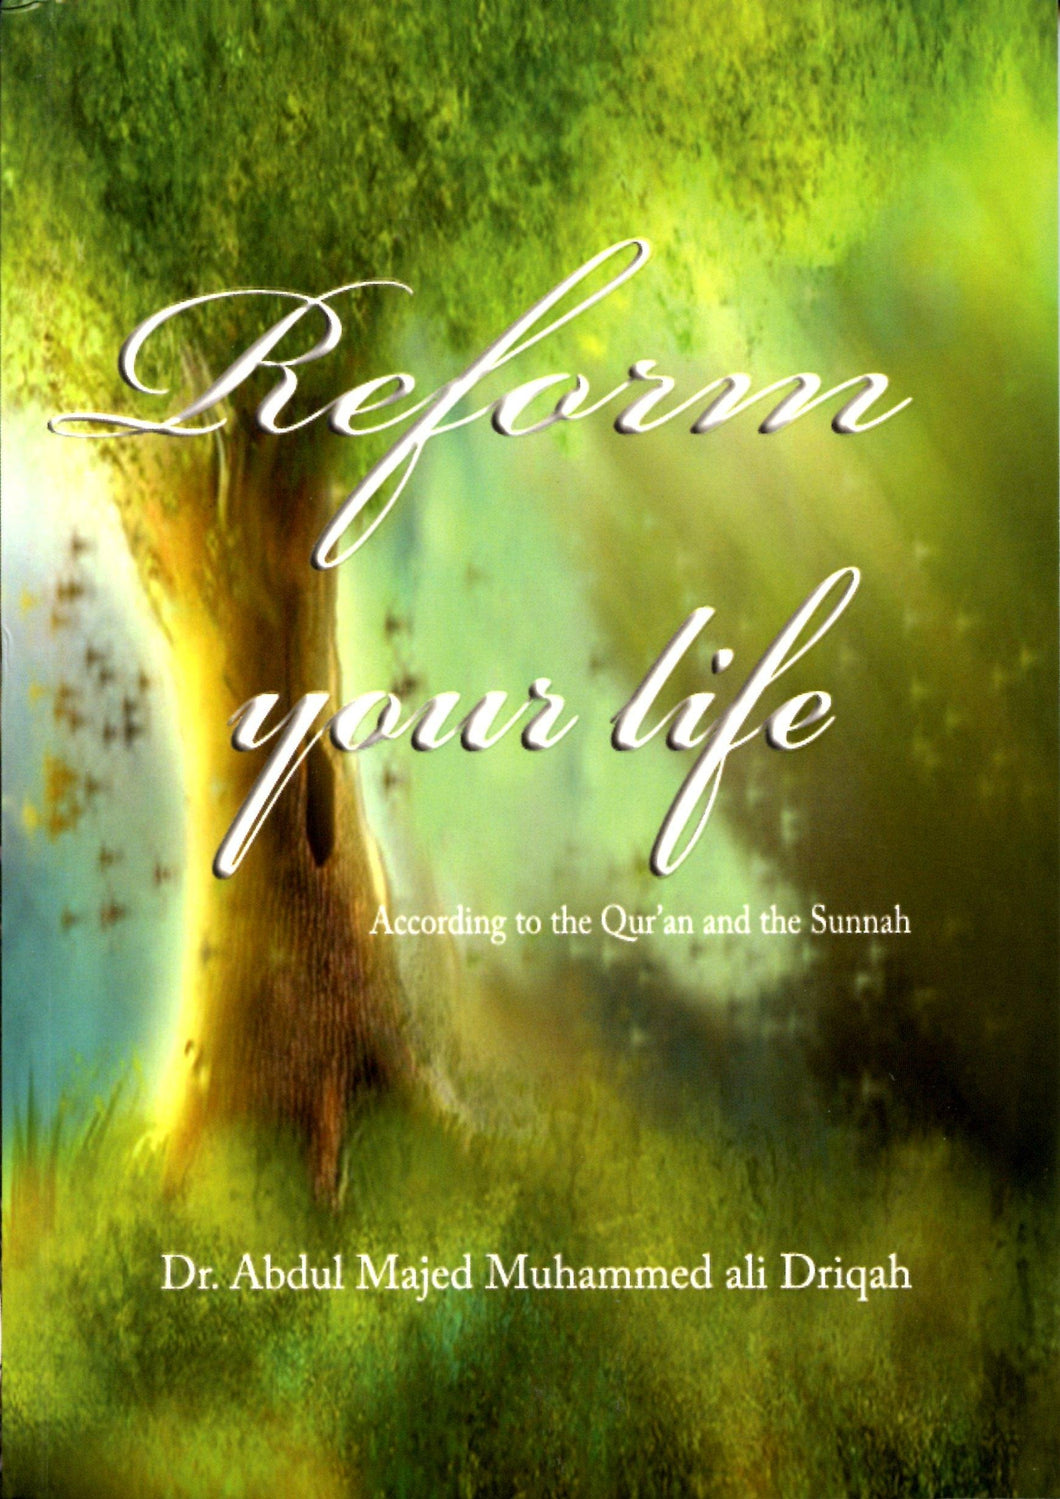 Reform Your Life (According to Quran and Sunnah)